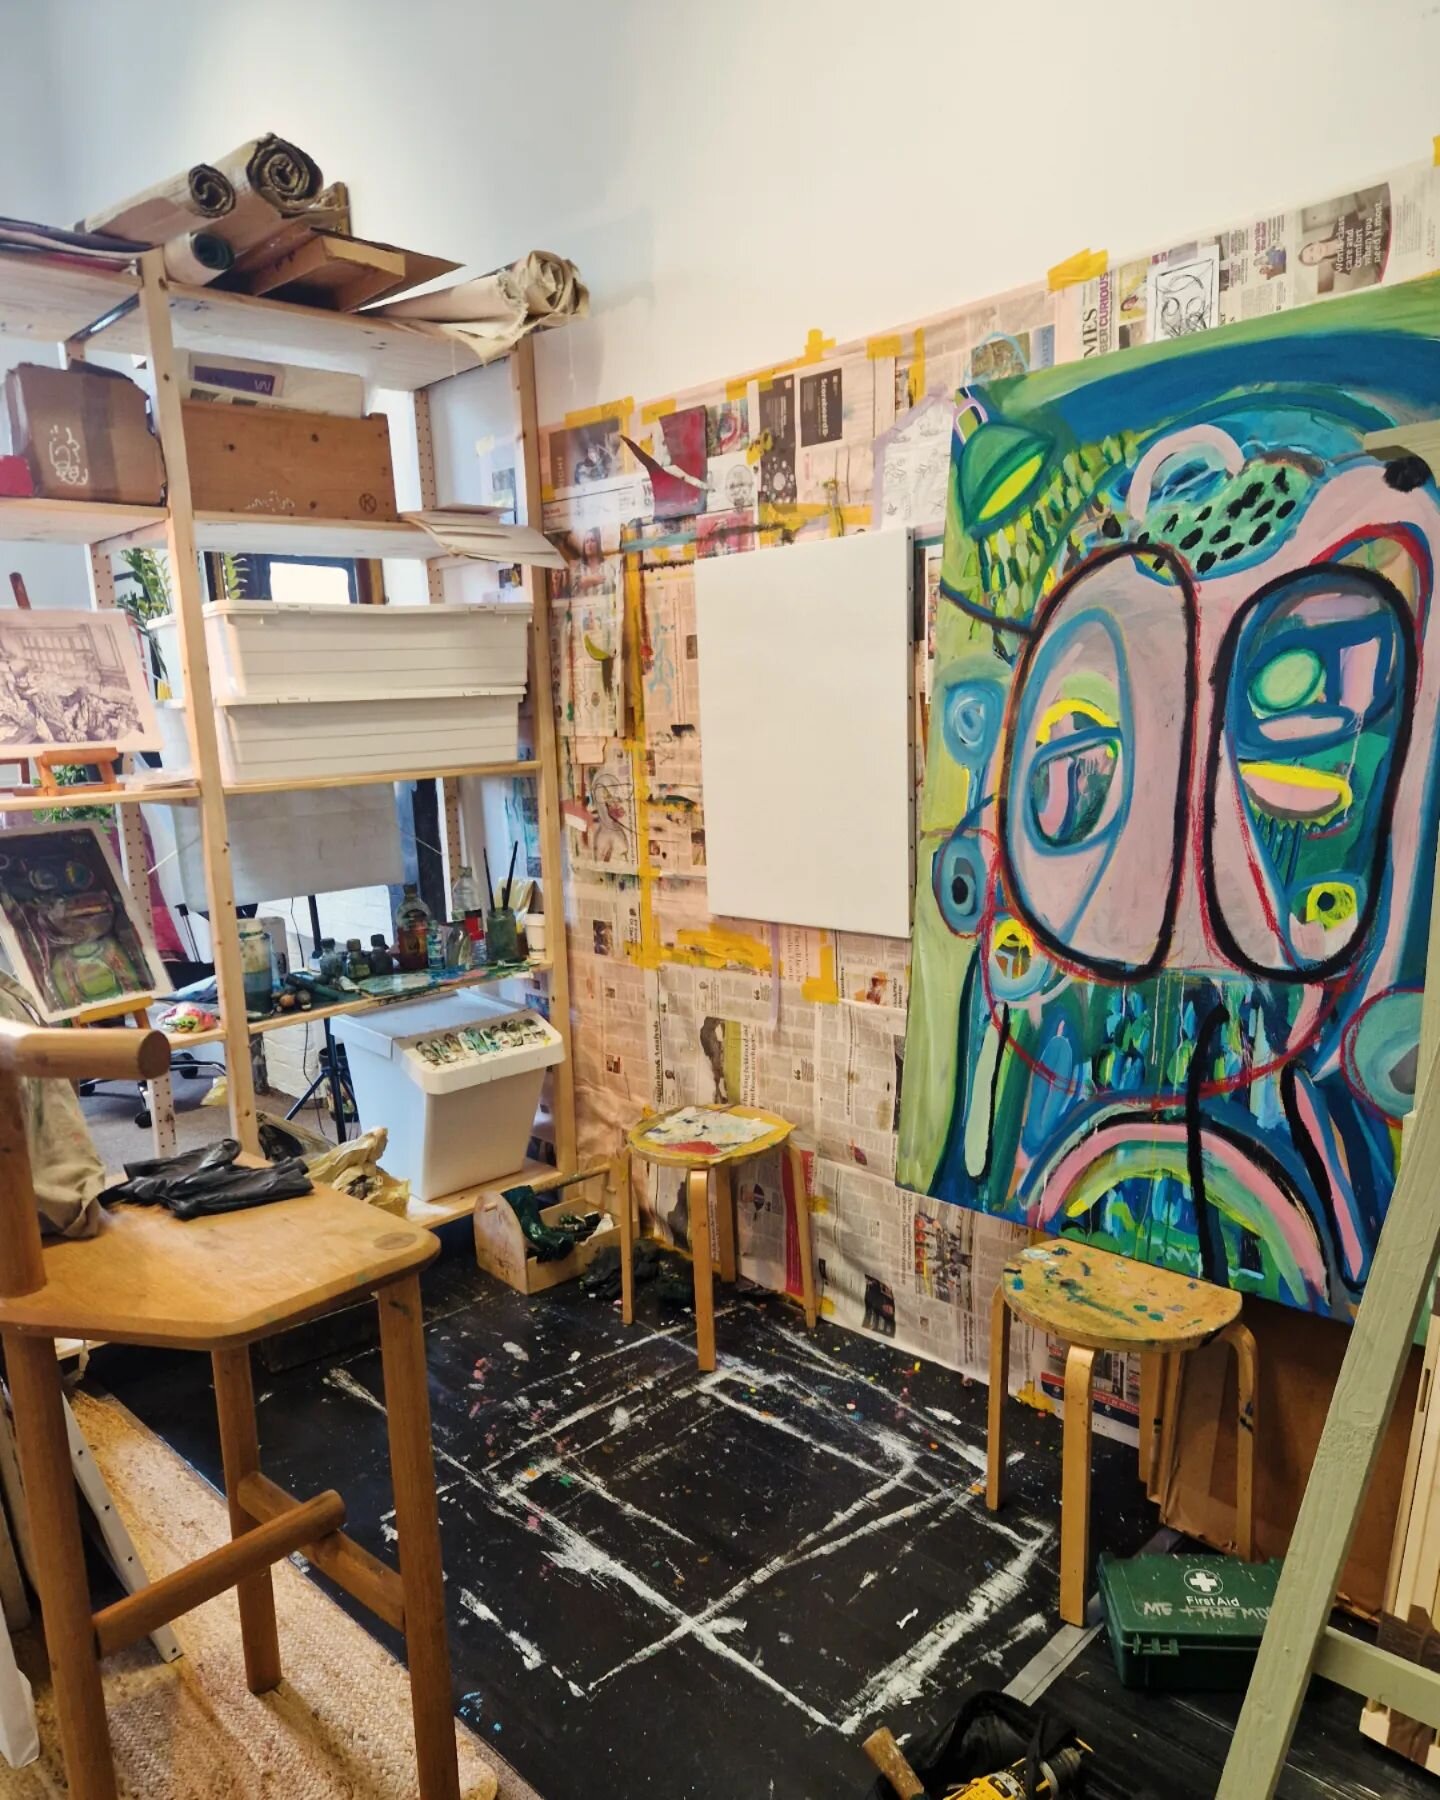 Studio visit.
Making some progress with the large painting on the right, but I will leave aside for now and begin something new. Many of the paintings I make evolve over long periods of time. I'm keen to see where a painting will go over long periods